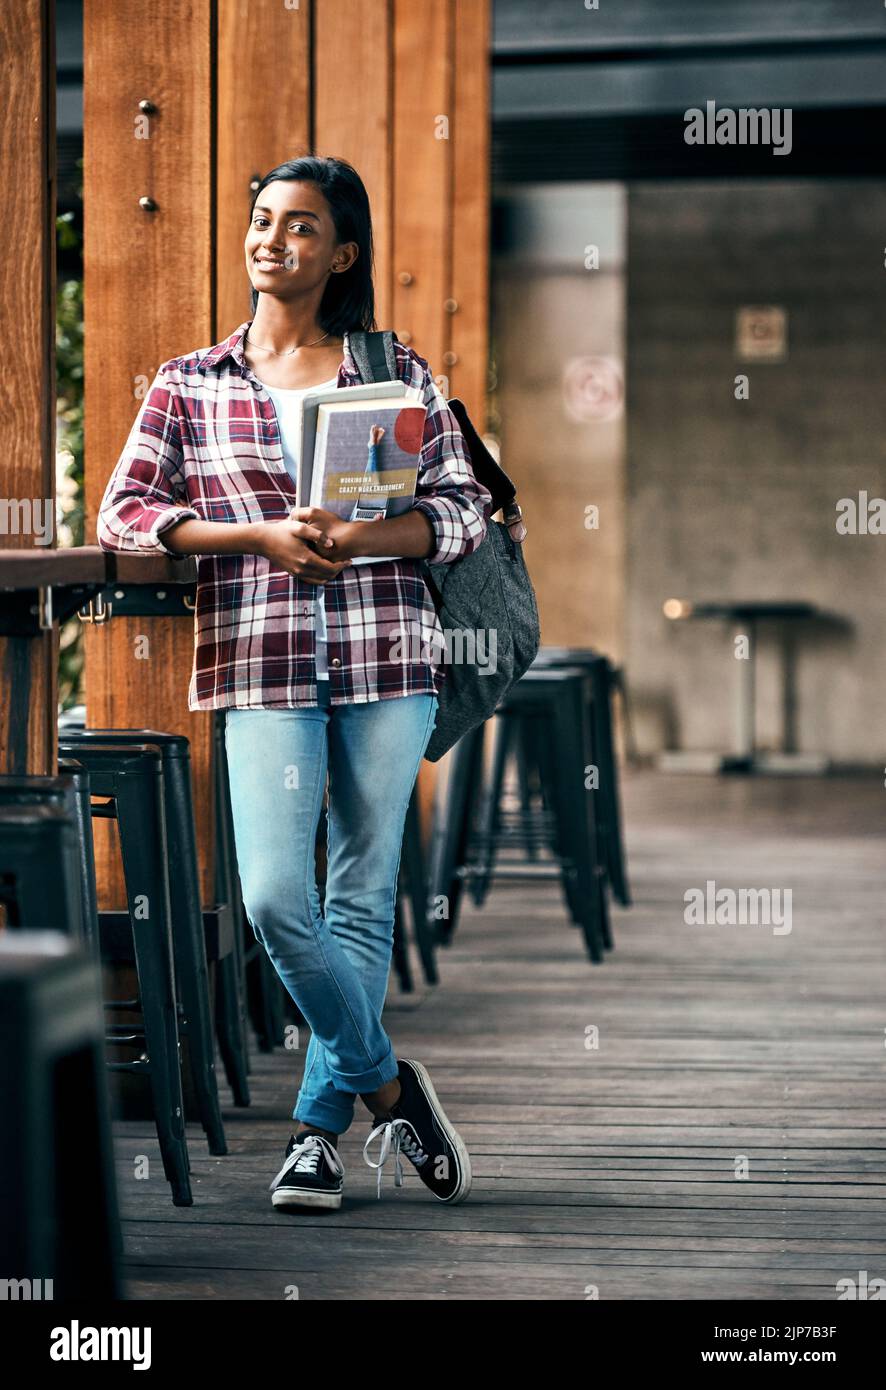 Enjoying being a student. a young female student holding textbooks outside on campus. Stock Photo